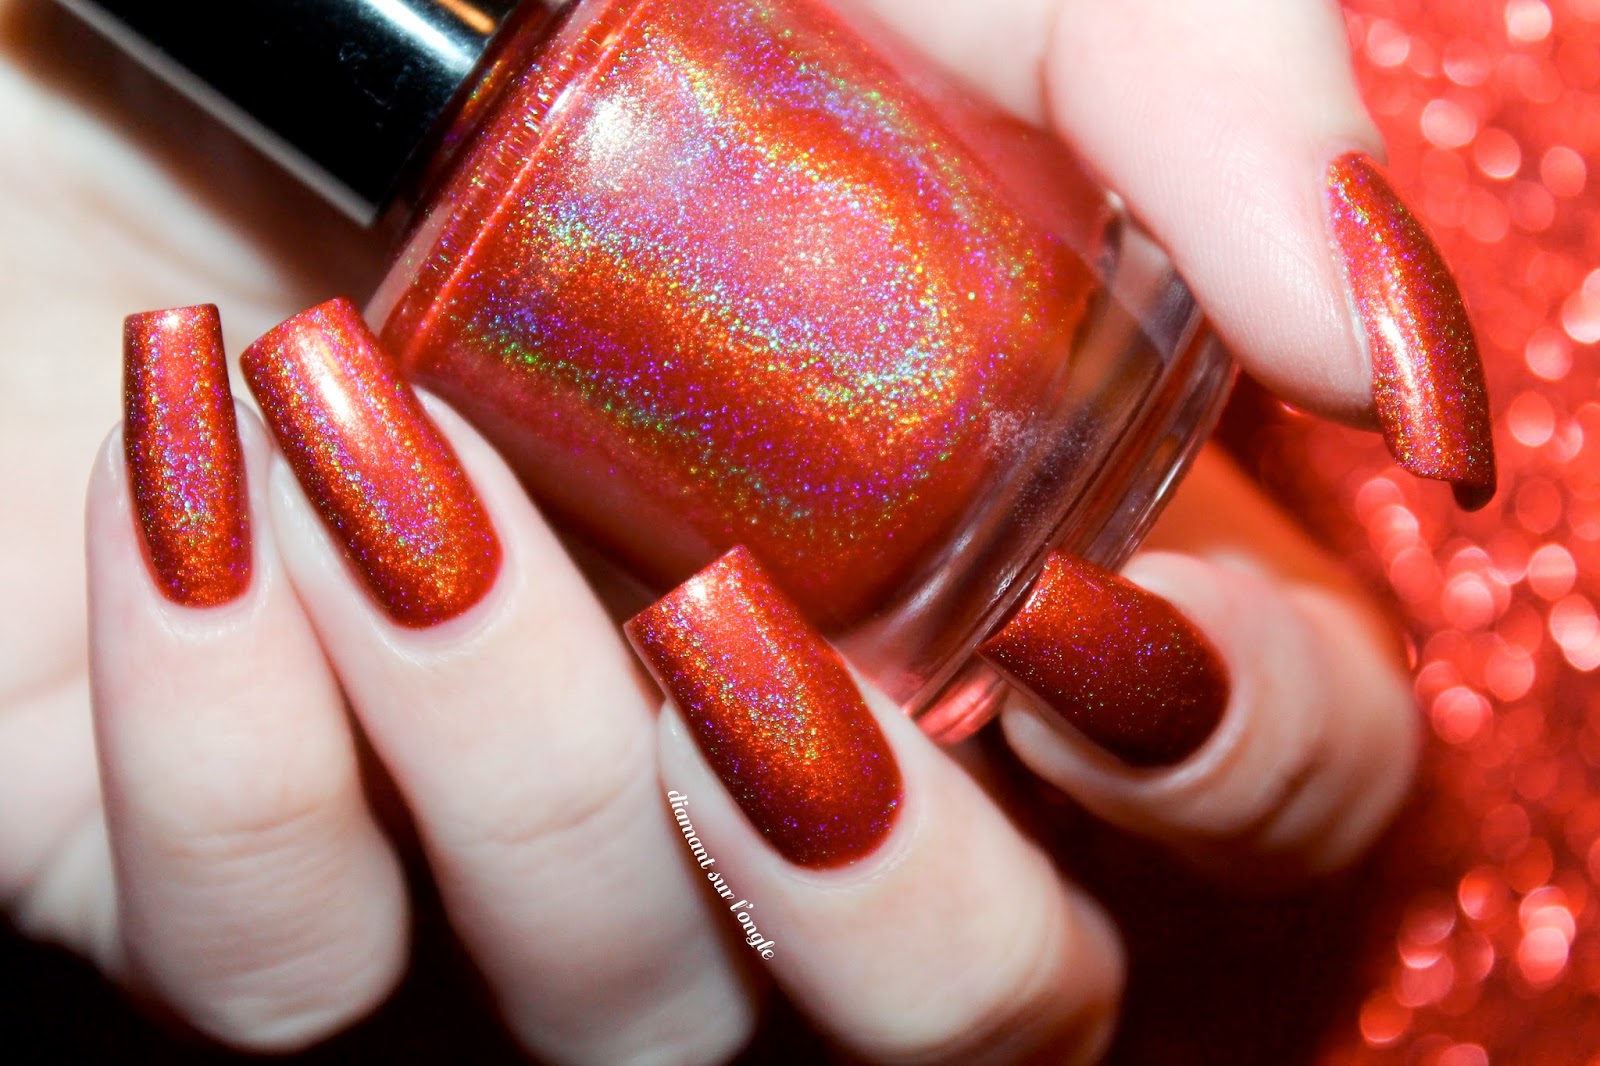 Swatch of "Another Brick In The Wall" by Eat.Sleep.Polish.